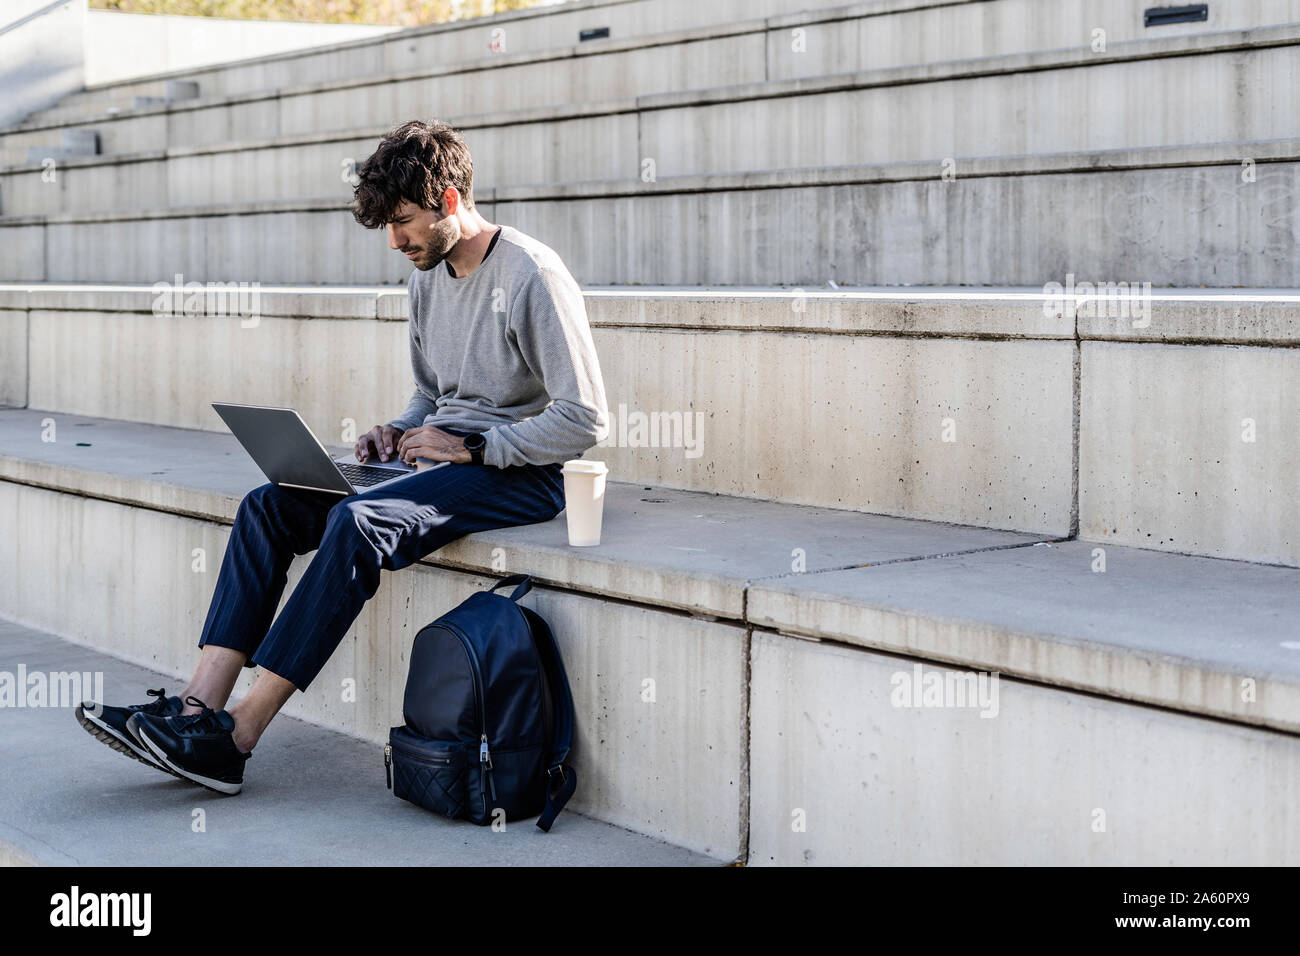 Man sitting on outdoor stairs using laptop Stock Photo